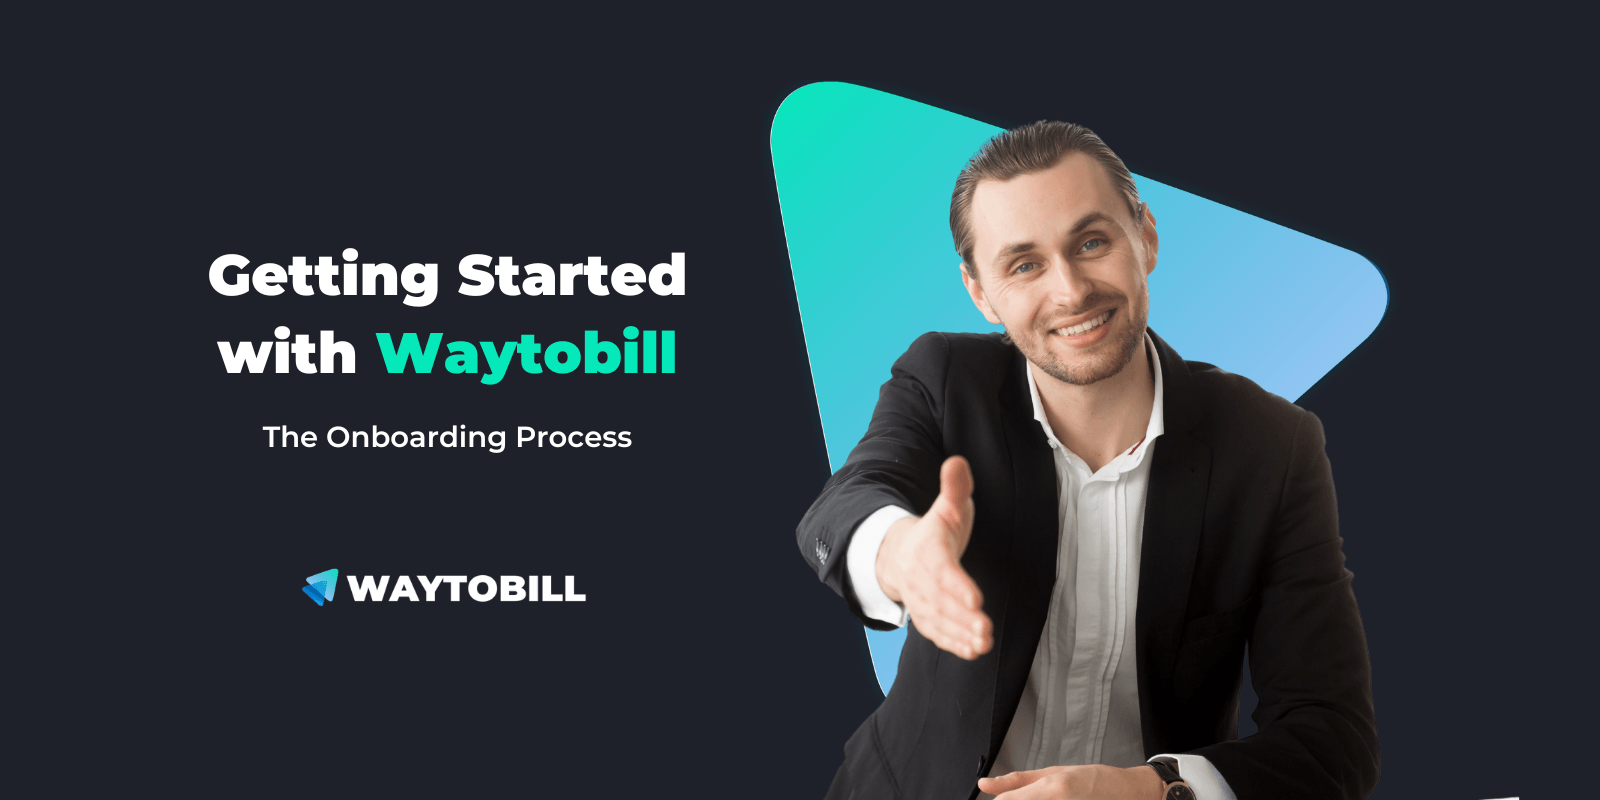 Getting Started with Waytobill: the Onboarding Process